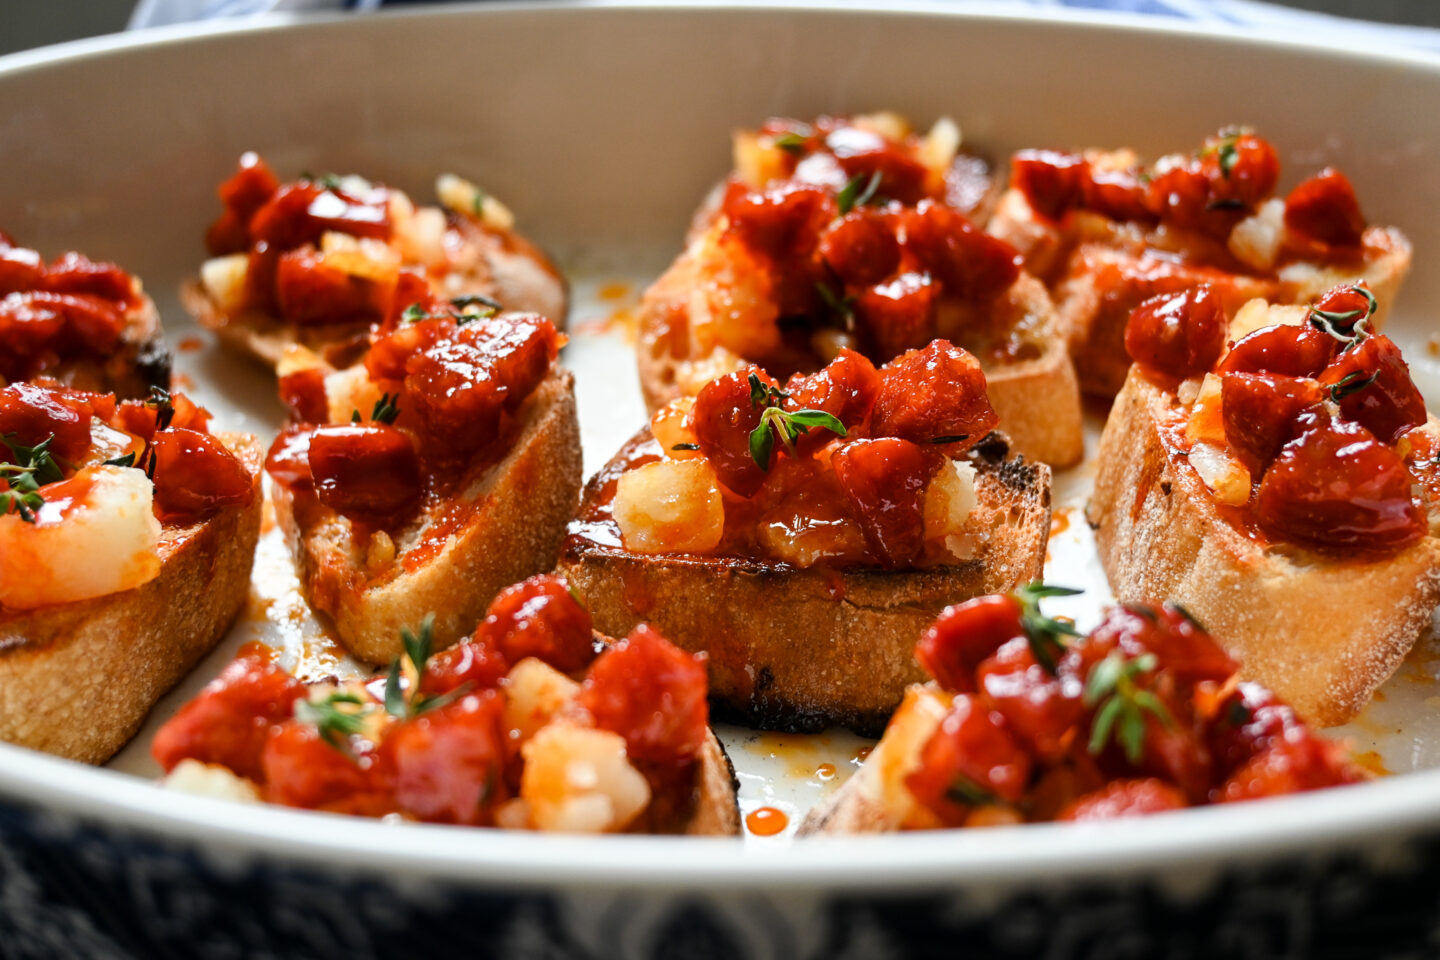 Honey Glazed Chorizo with Manchego Cheese on small slices of toasted baguette in a close-up shot